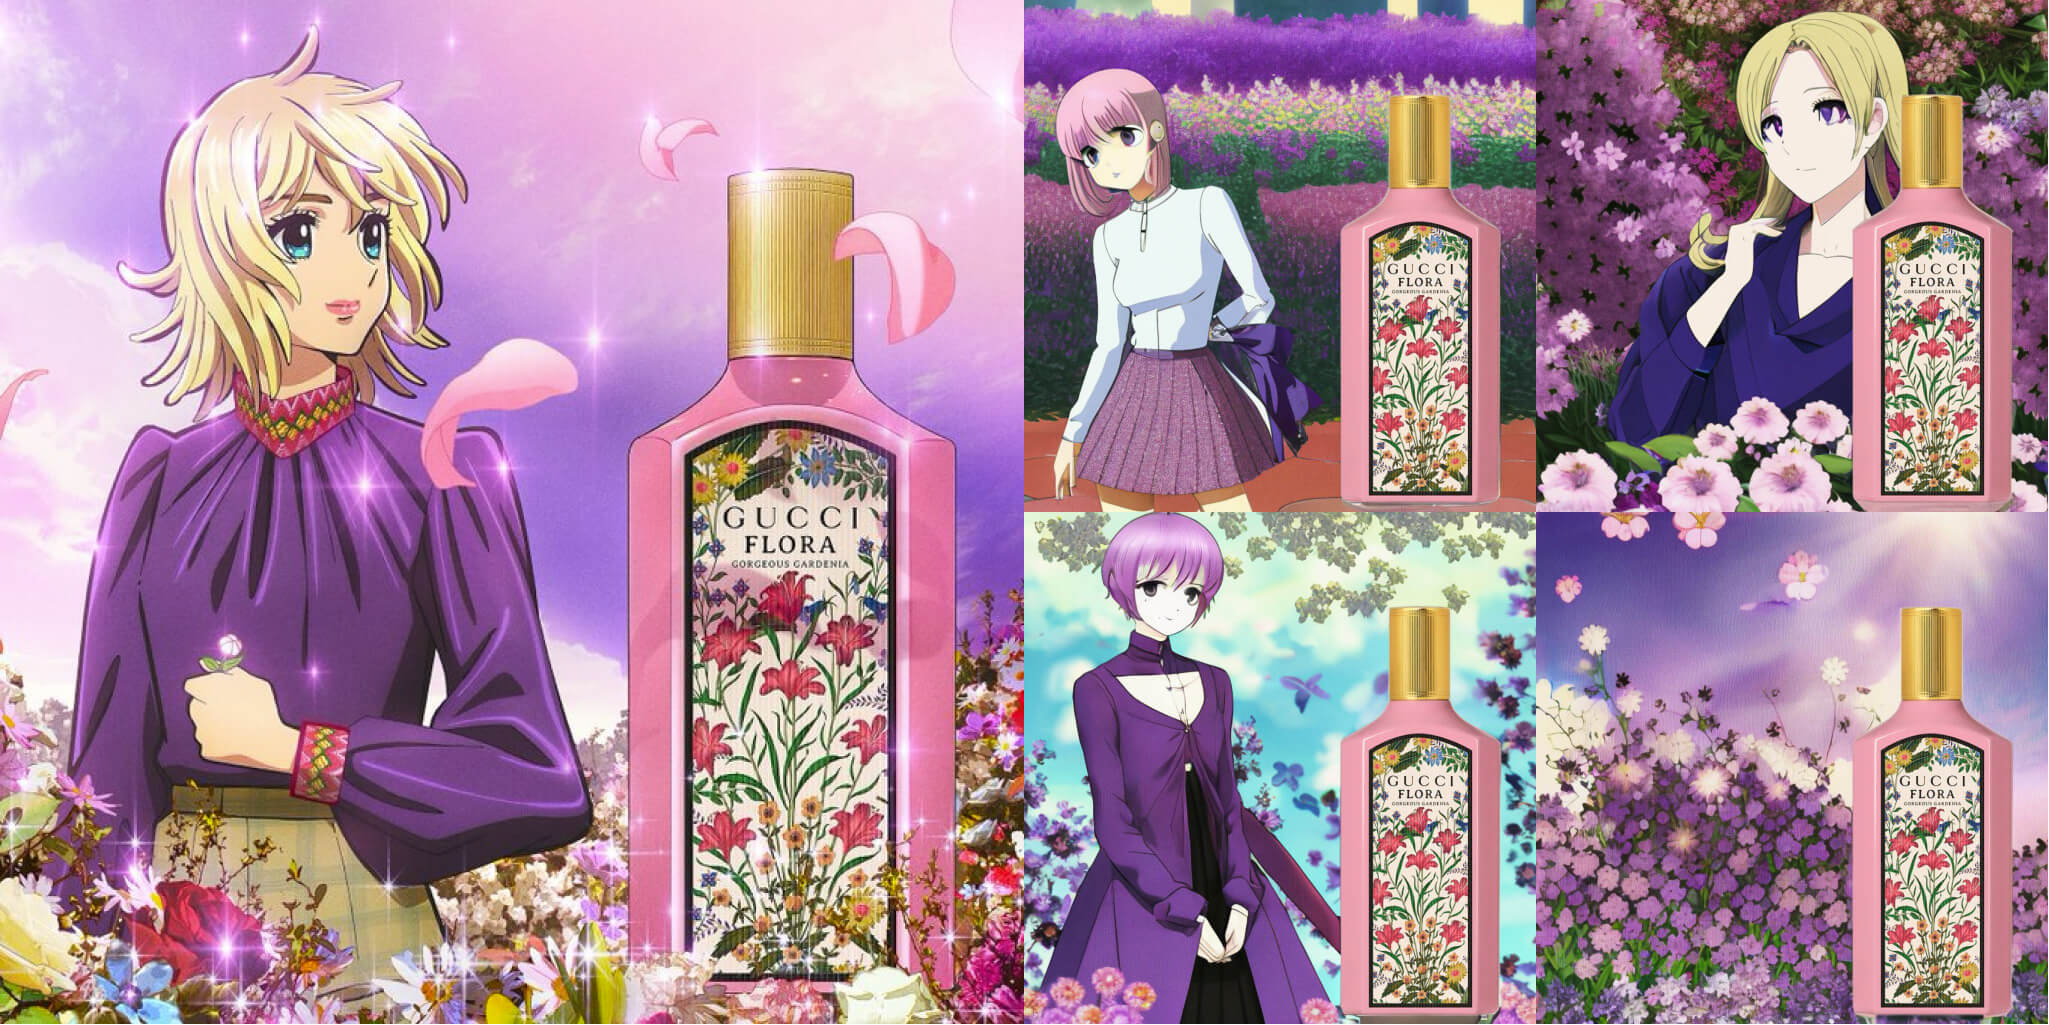 Gucci Flora anima-style product images